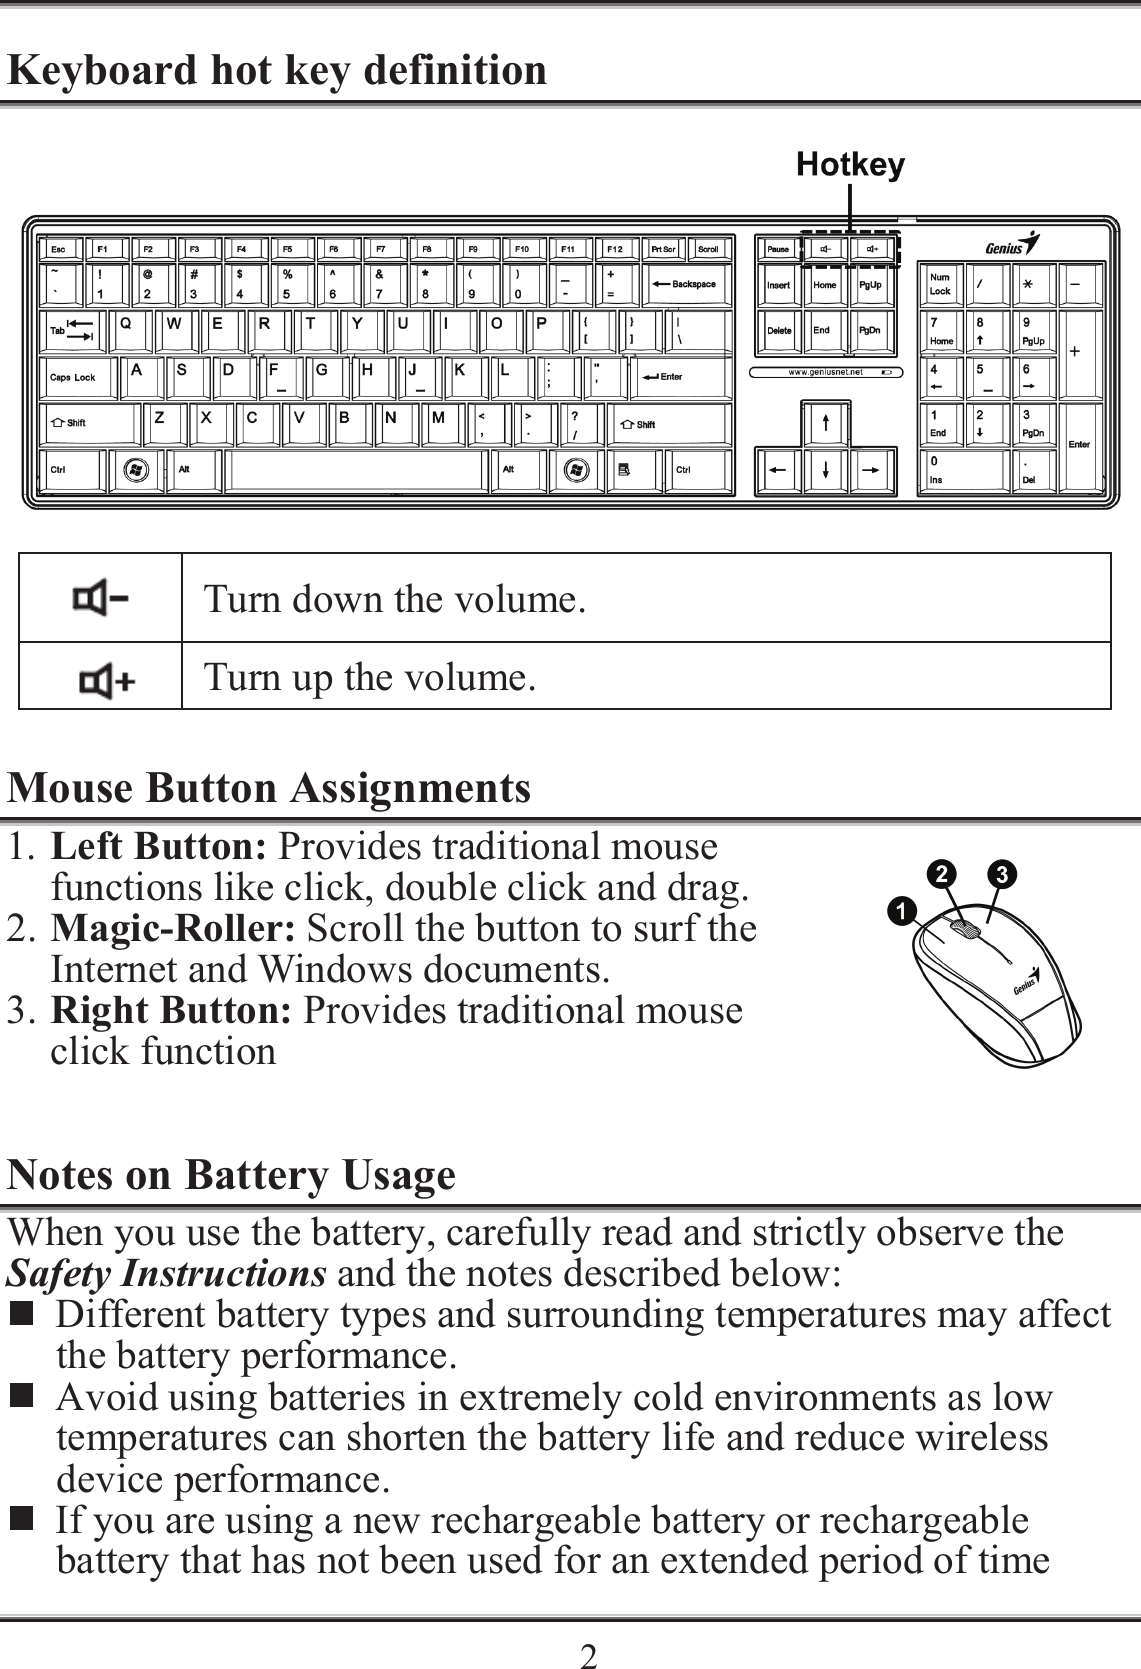    2Keyboard hot key definition   Turn down the volume.  Turn up the volume.  Mouse Button Assignments 1. Left Button: Provides traditional mouse functions like click, double click and drag. 2. Magic-Roller: Scroll the button to surf the Internet and Windows documents. 3. Right Button: Provides traditional mouse click function  Notes on Battery Usage When you use the battery, carefully read and strictly observe the Safety Instructions and the notes described below:  Different battery types and surrounding temperatures may affect the battery performance.  Avoid using batteries in extremely cold environments as low temperatures can shorten the battery life and reduce wireless device performance.  If you are using a new rechargeable battery or rechargeable battery that has not been used for an extended period of time 